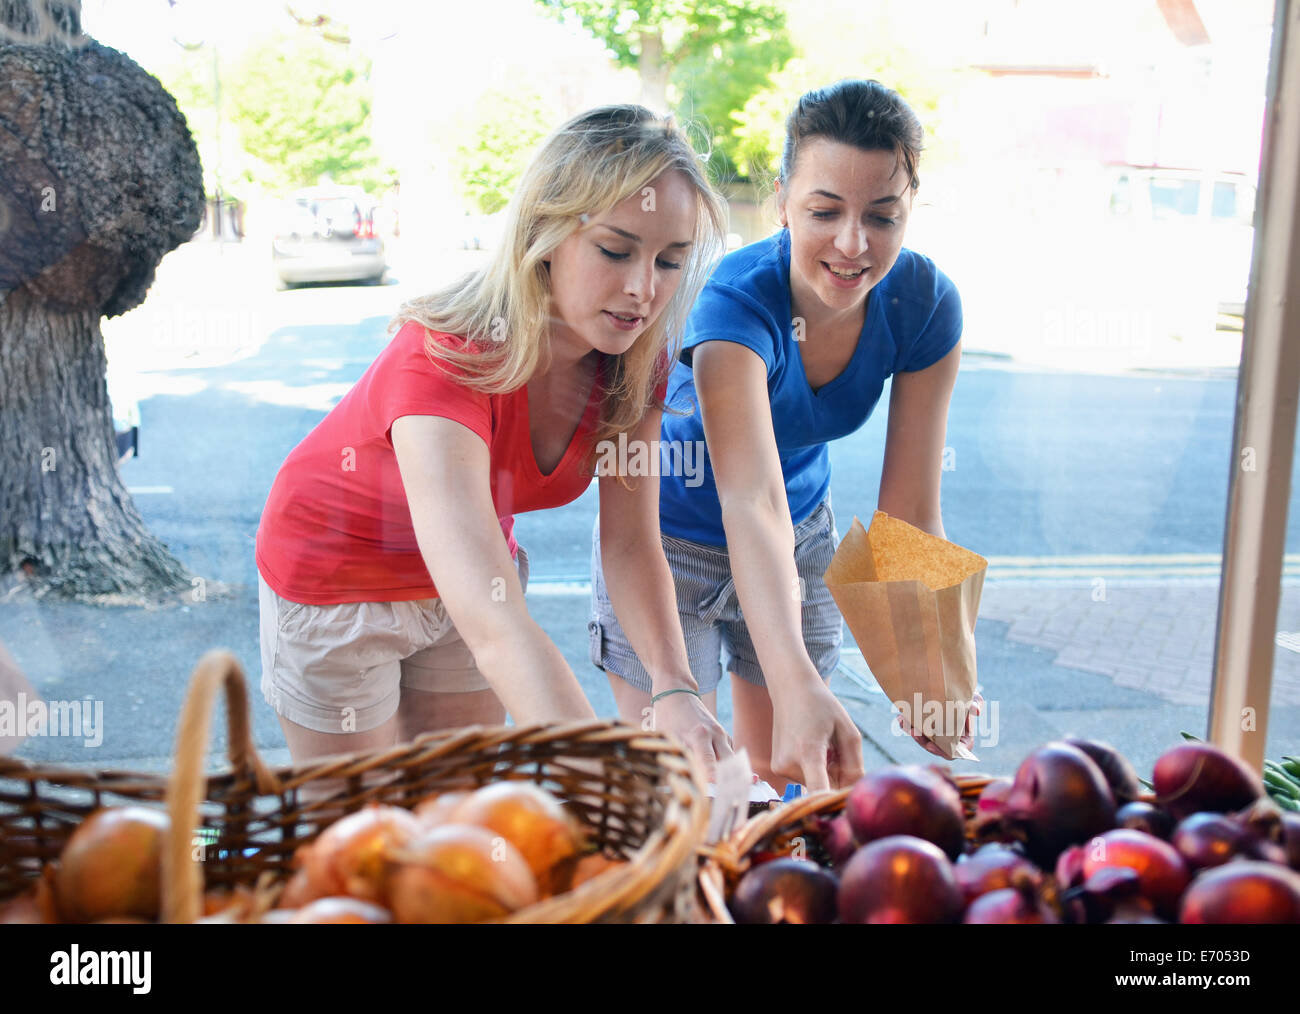 Two young women choosing food at market stall Stock Photo